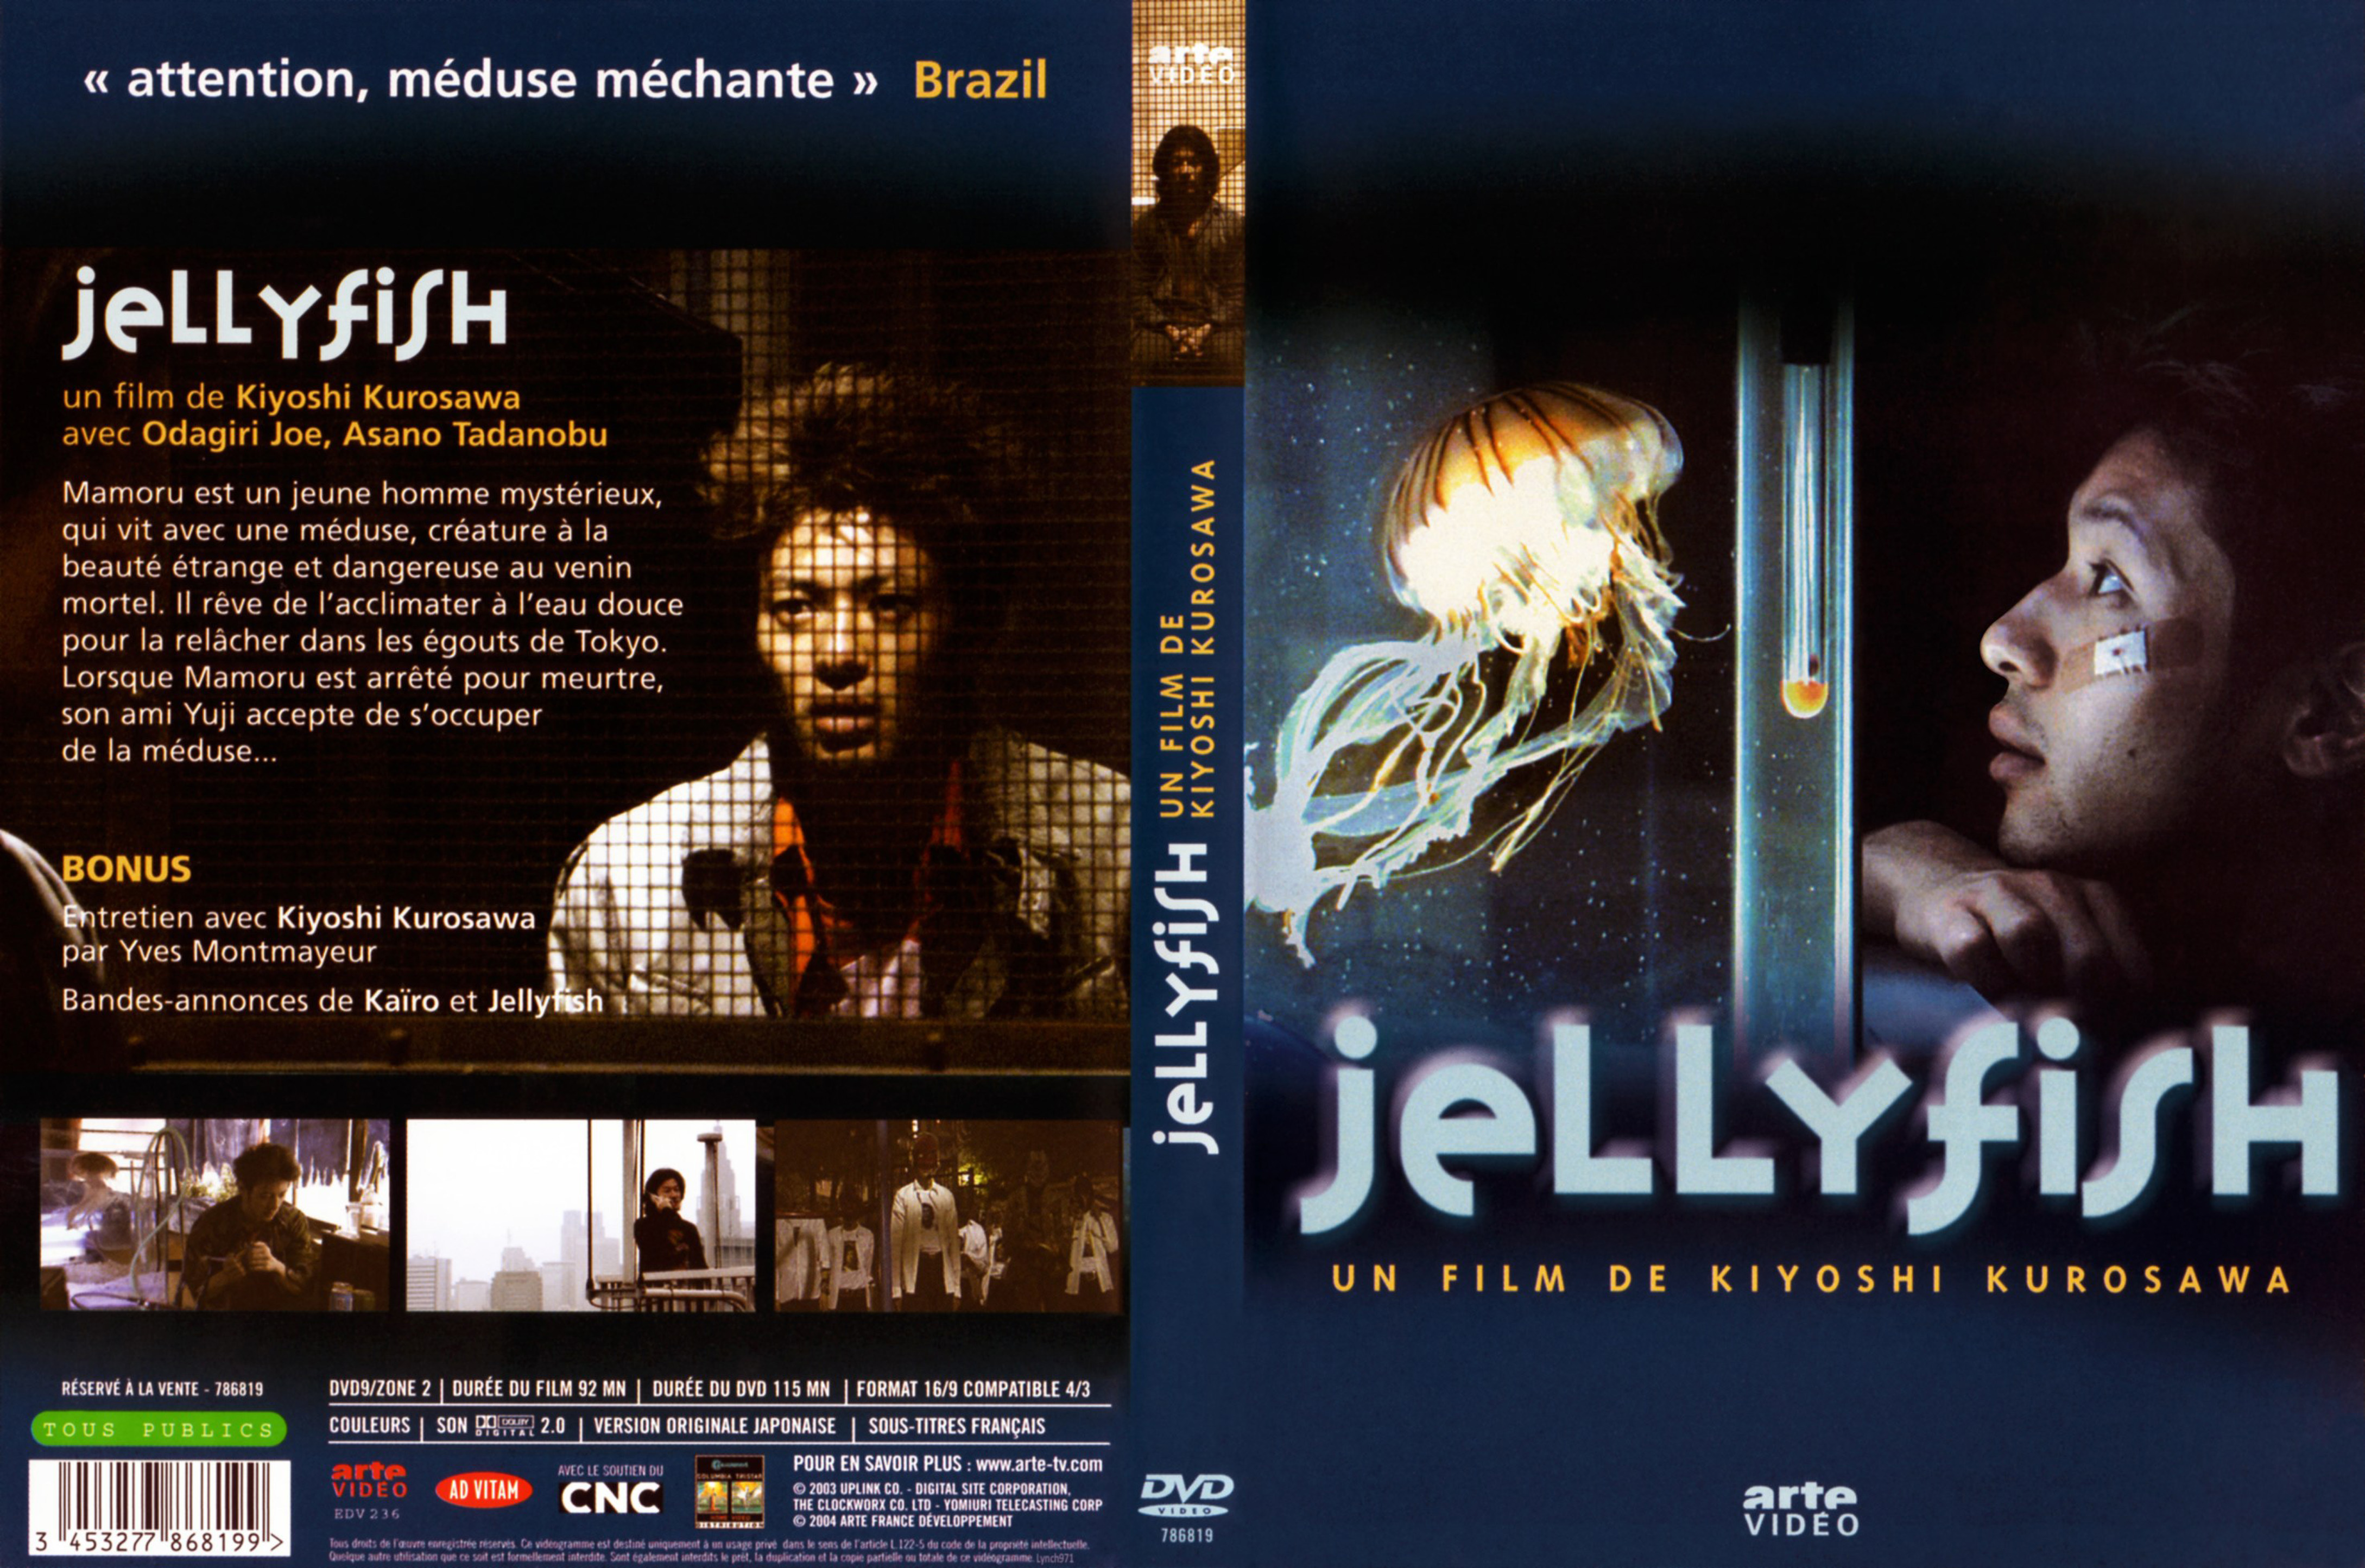 Jaquette DVD Jellyfish